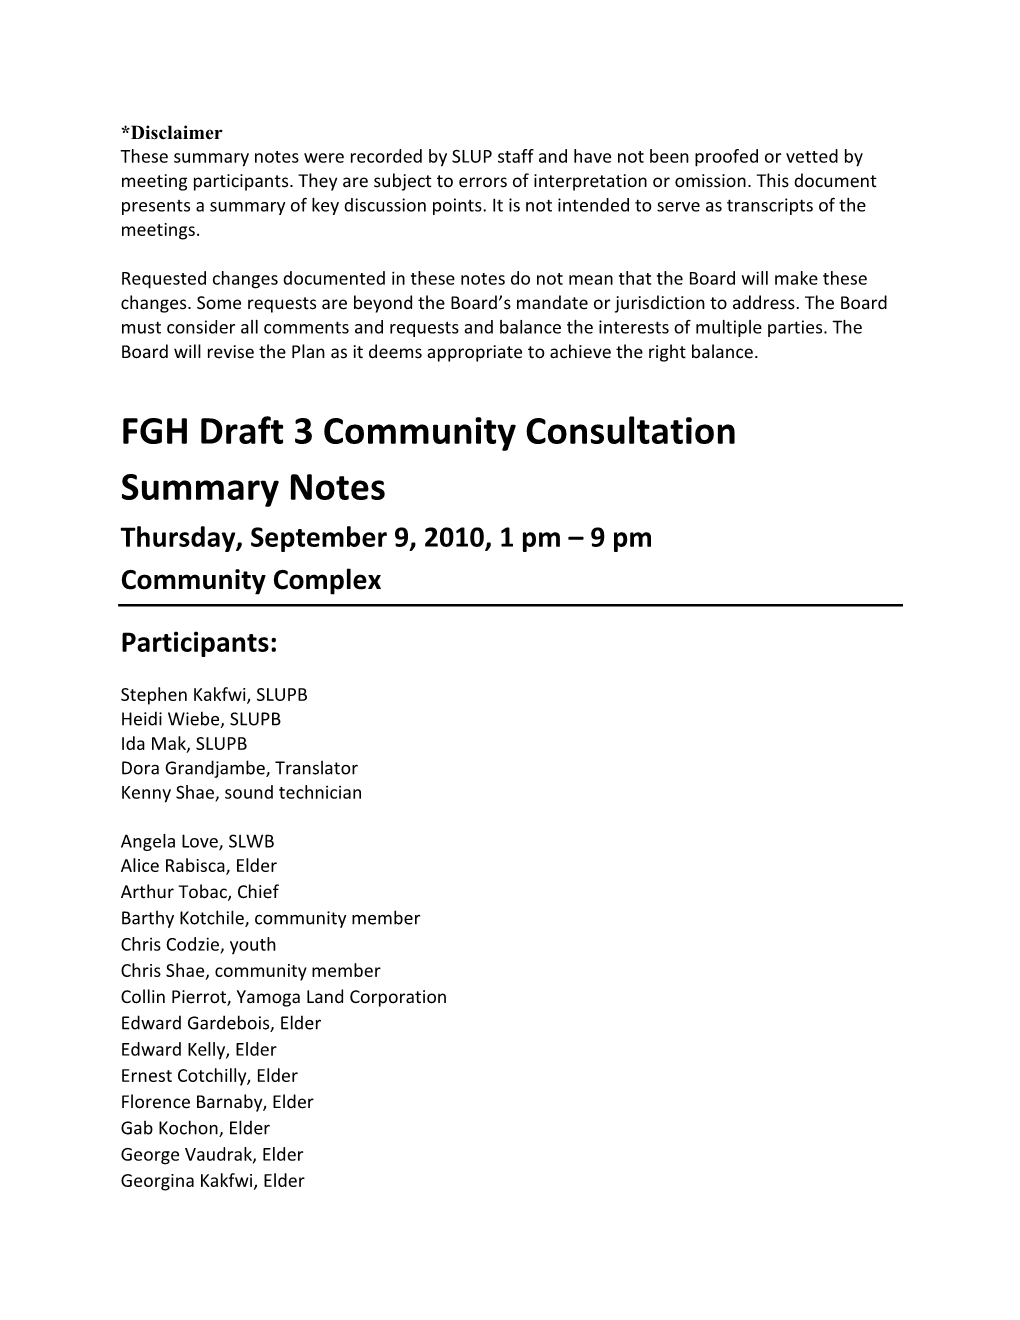 FGH Draft 3 Community Consultation Summary Notes Thursday, September 9, 2010, 1 Pm – 9 Pm Community Complex